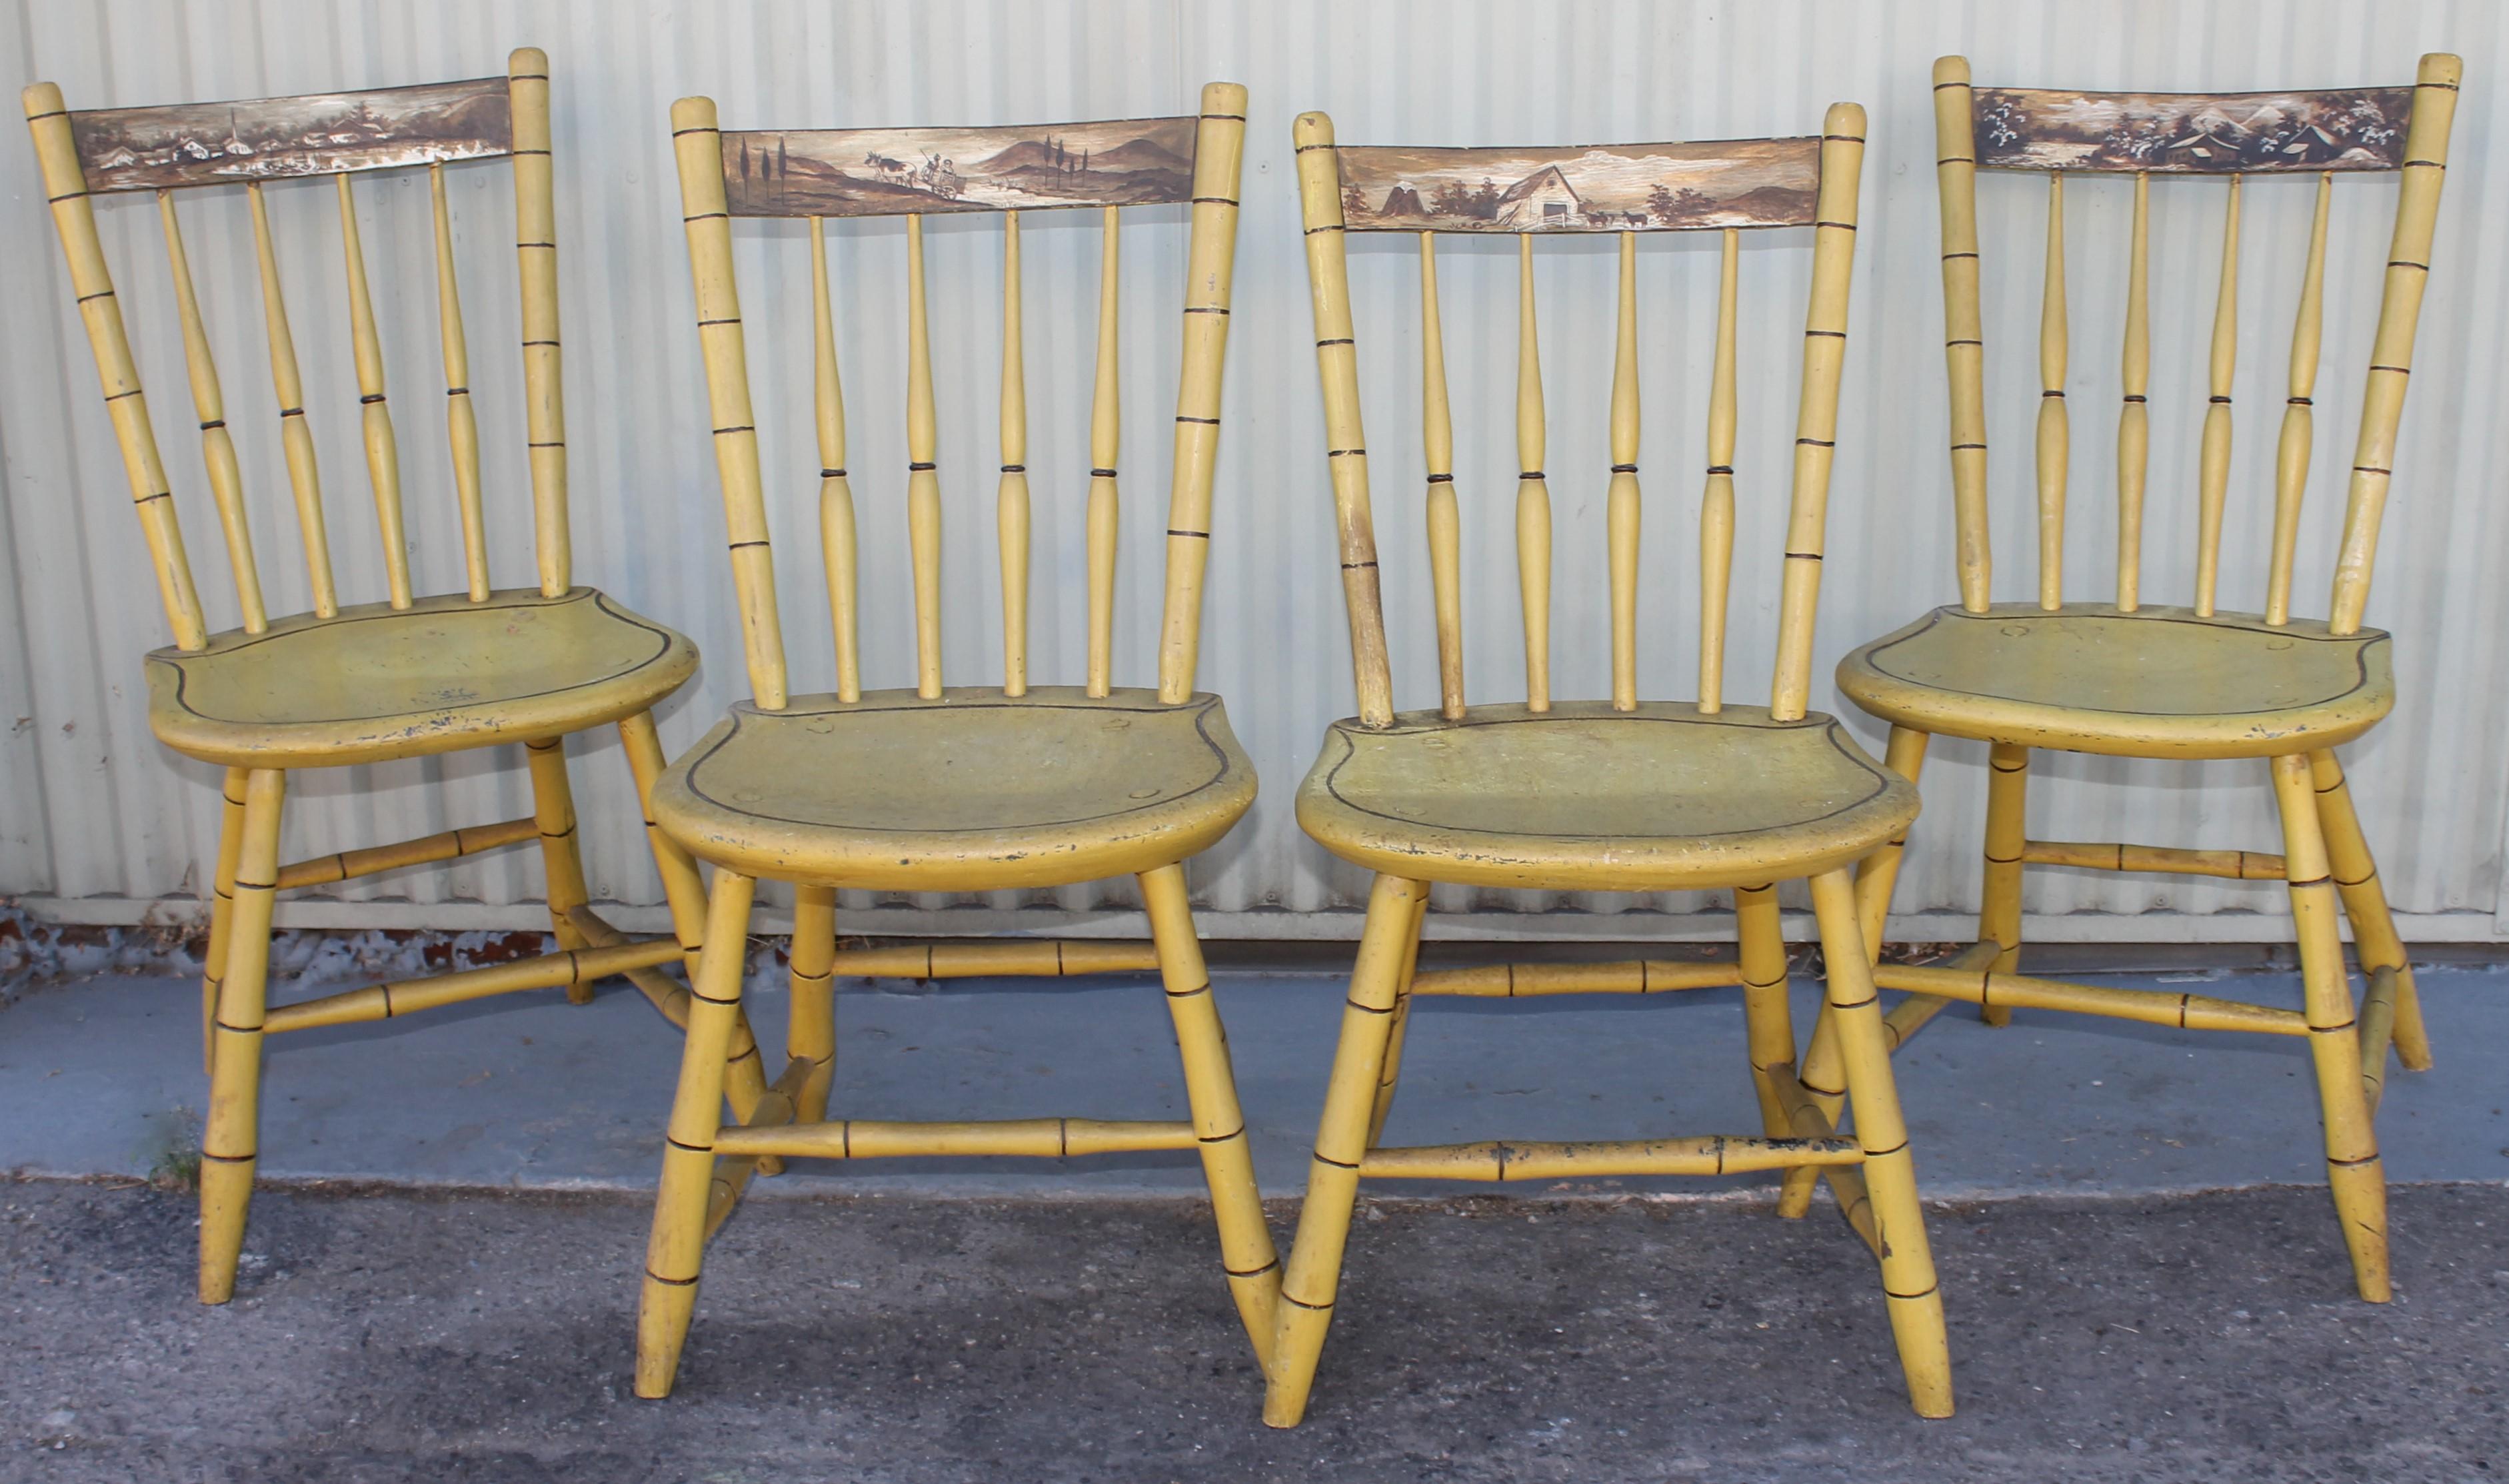 Hand-Painted 19Thc Original Painted & Decorated NE Chairs For Sale